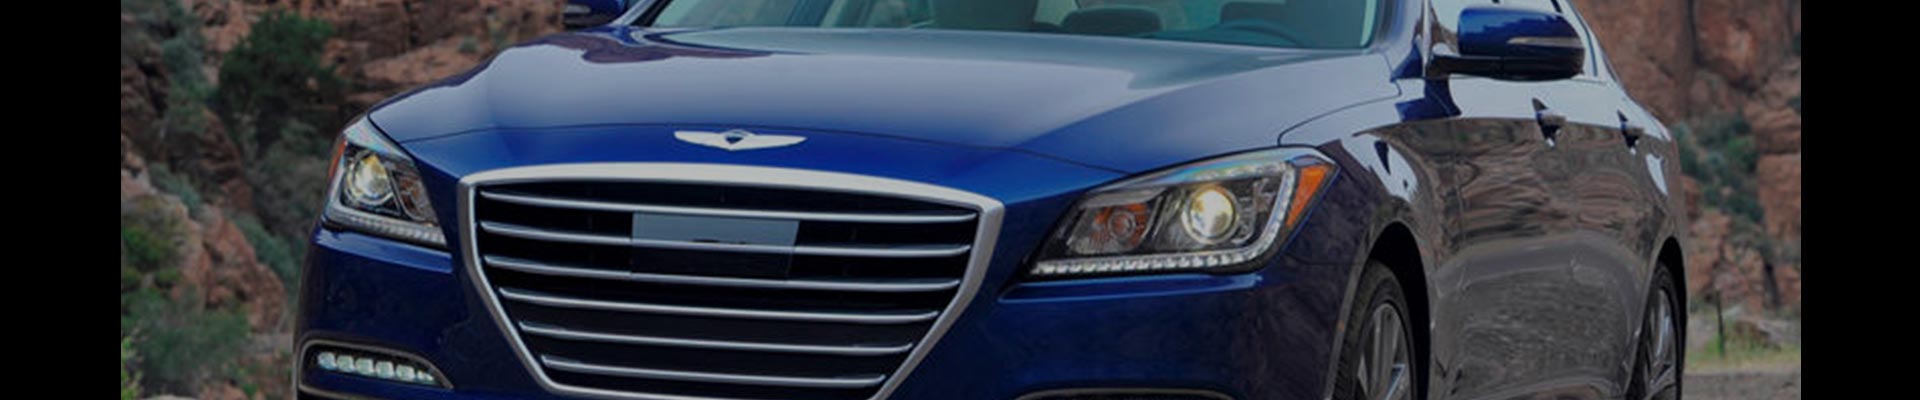 Shop Replacement and OEM 2014 Hyundai Genesis Parts with Discounted Price on the Net